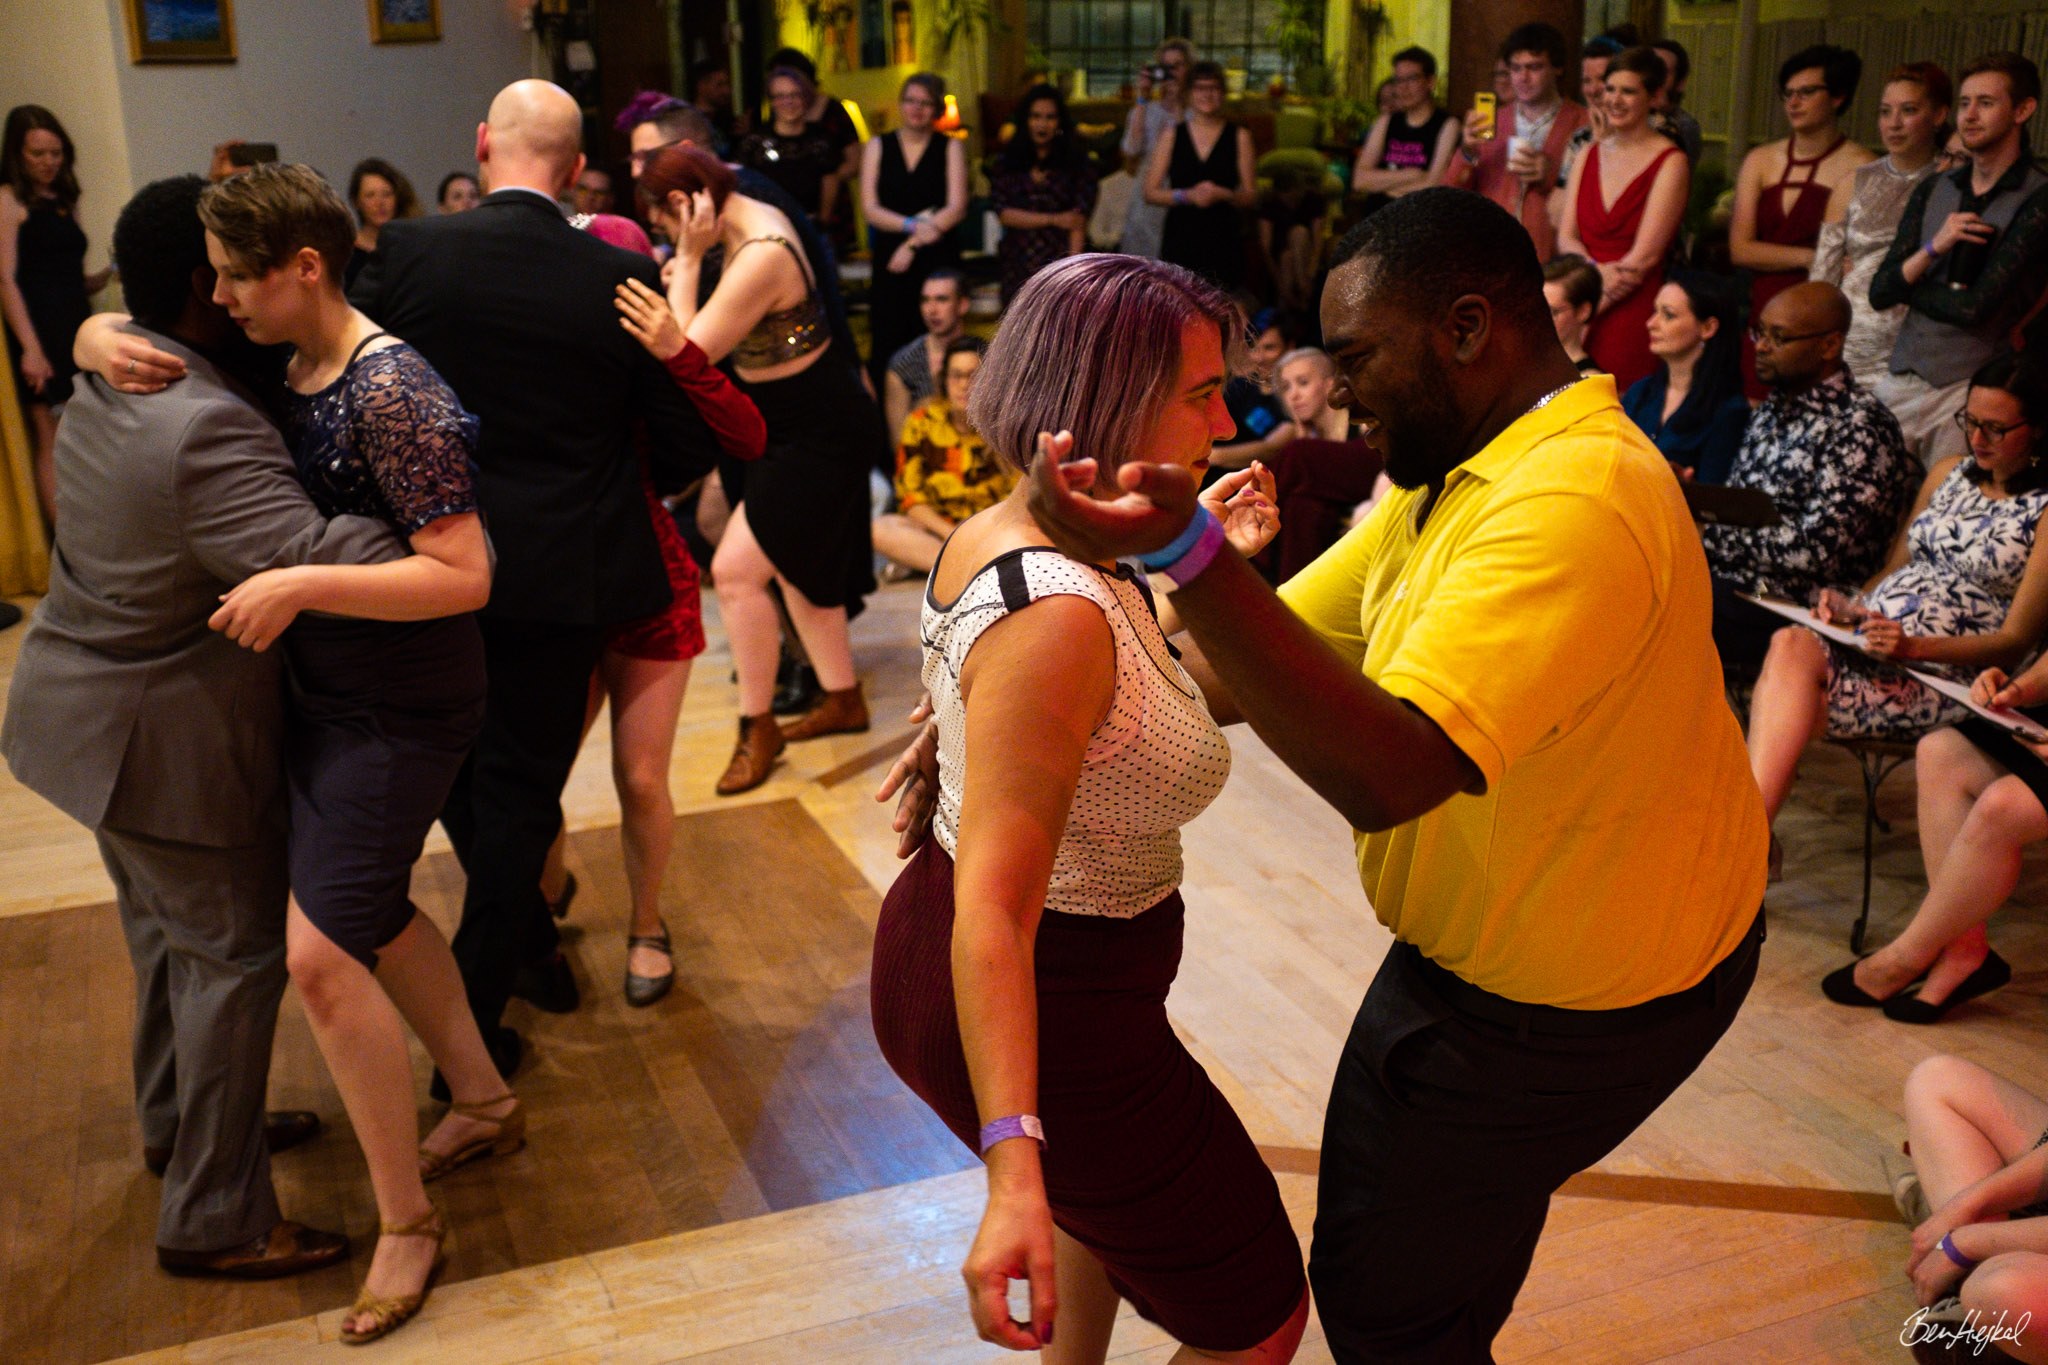 Multiple dancing duos compete at North Star Blues, in front of an audience and judges. One partnership is centered in the frame, the two dancers make eye contact while in closed position. The leading person is Black and masc, wearing a yellow polo and black pants. The person following is a white femme in a polkadot top and red skirt.